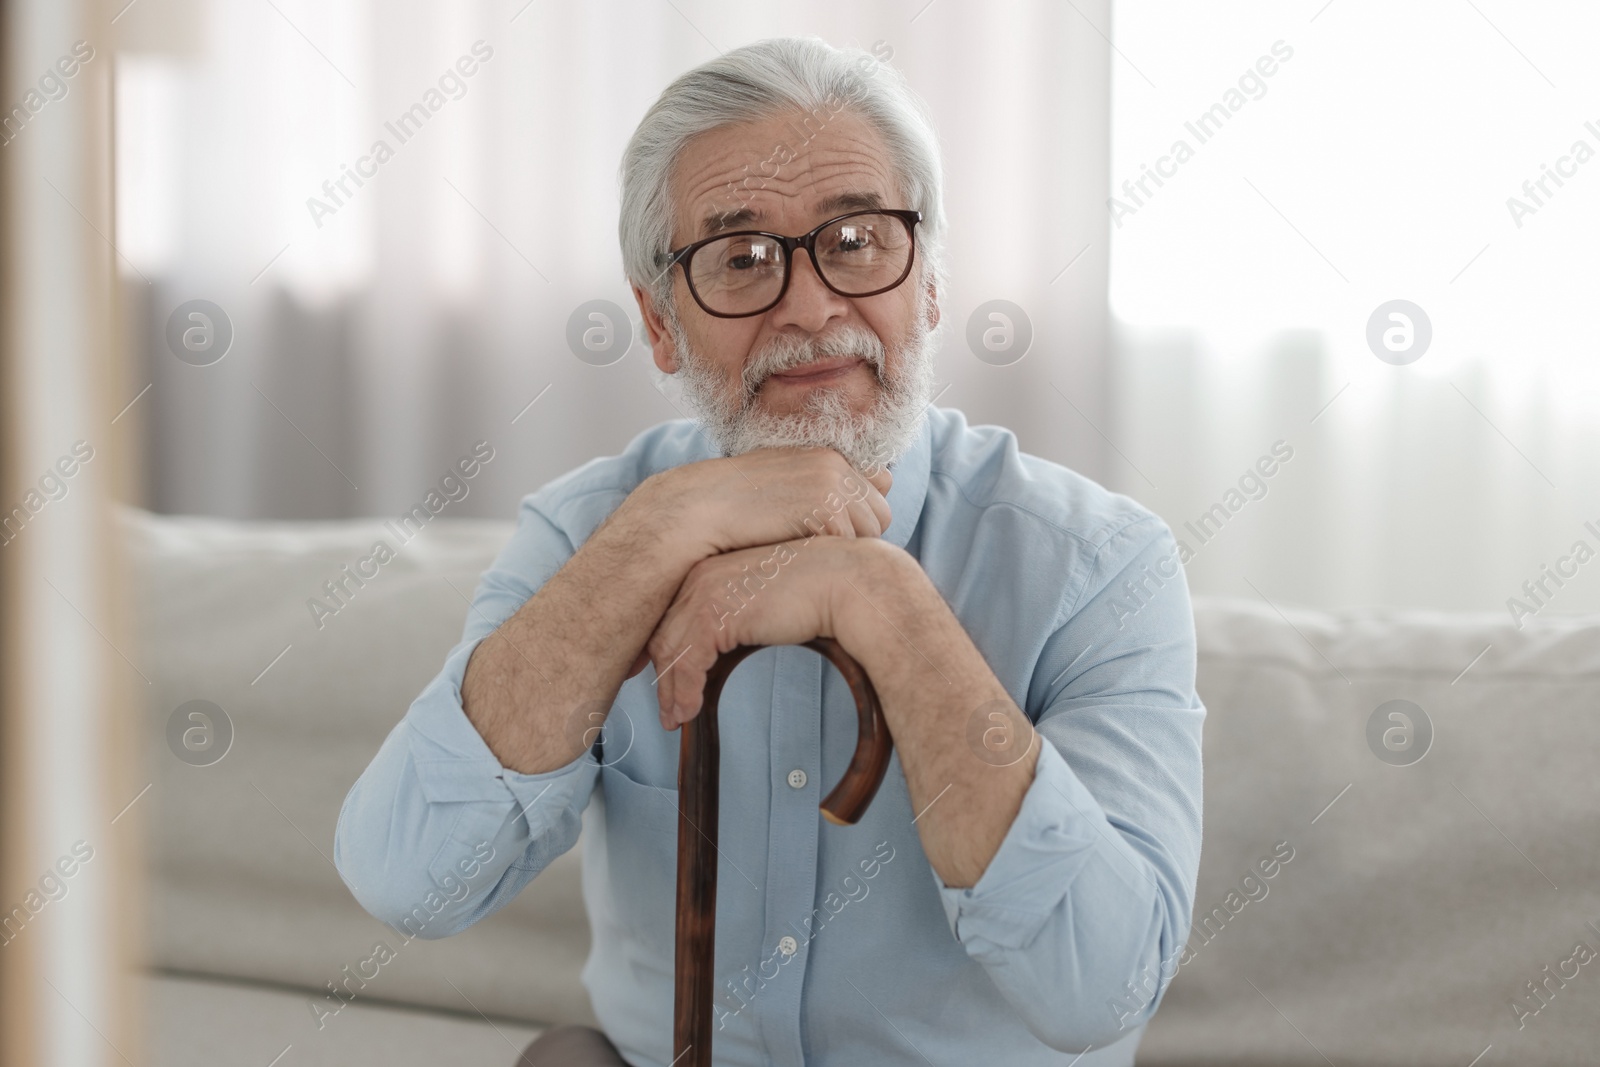 Photo of Portrait of grandpa with glasses and walking cane on sofa indoors